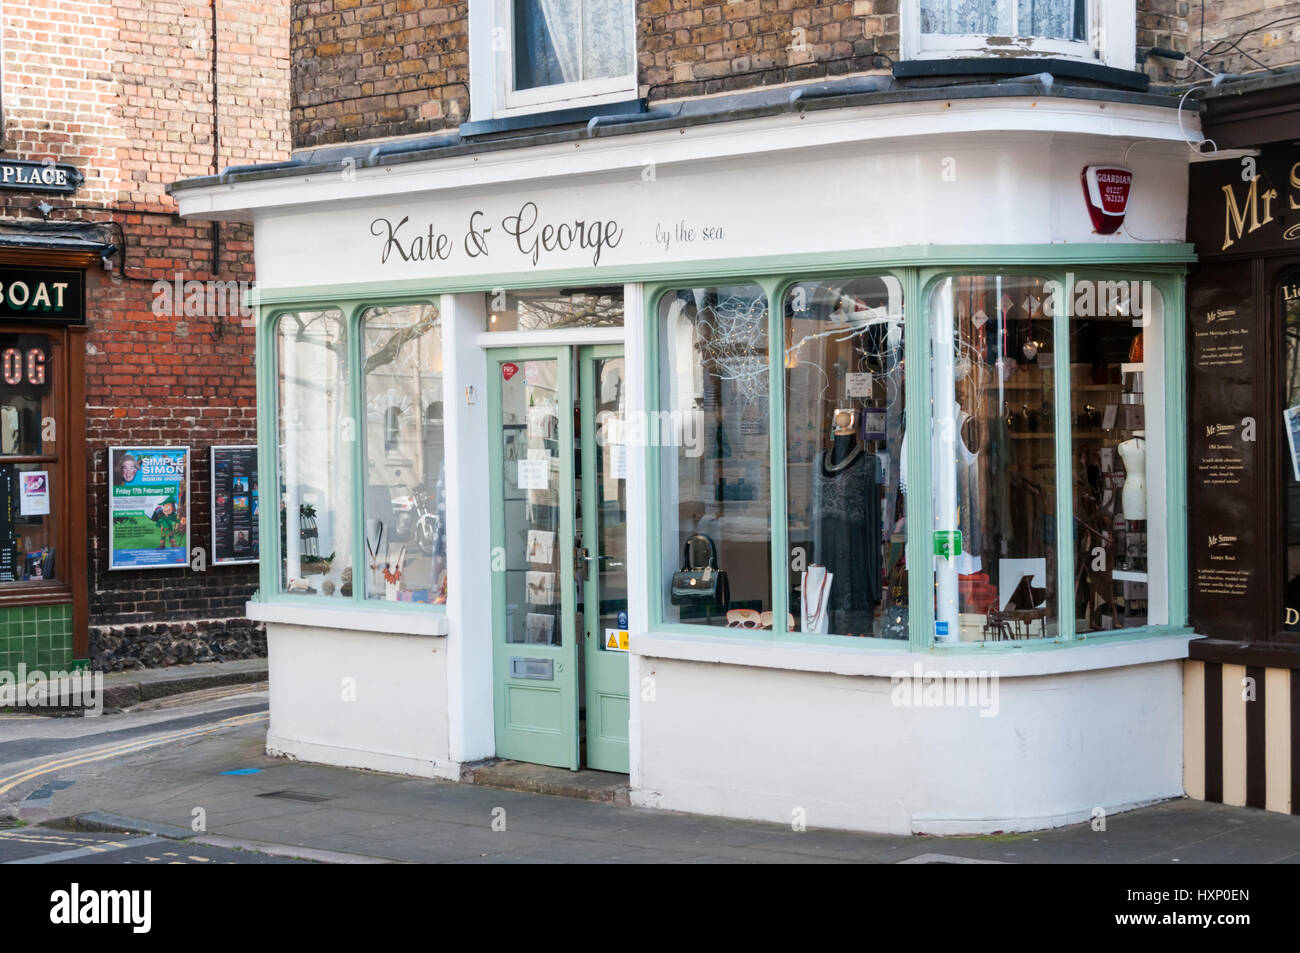 Kate & George by the sea in Margate old town sells women's clothes and Jewellery.  It used to be called Beaux Interieurs. Stock Photo